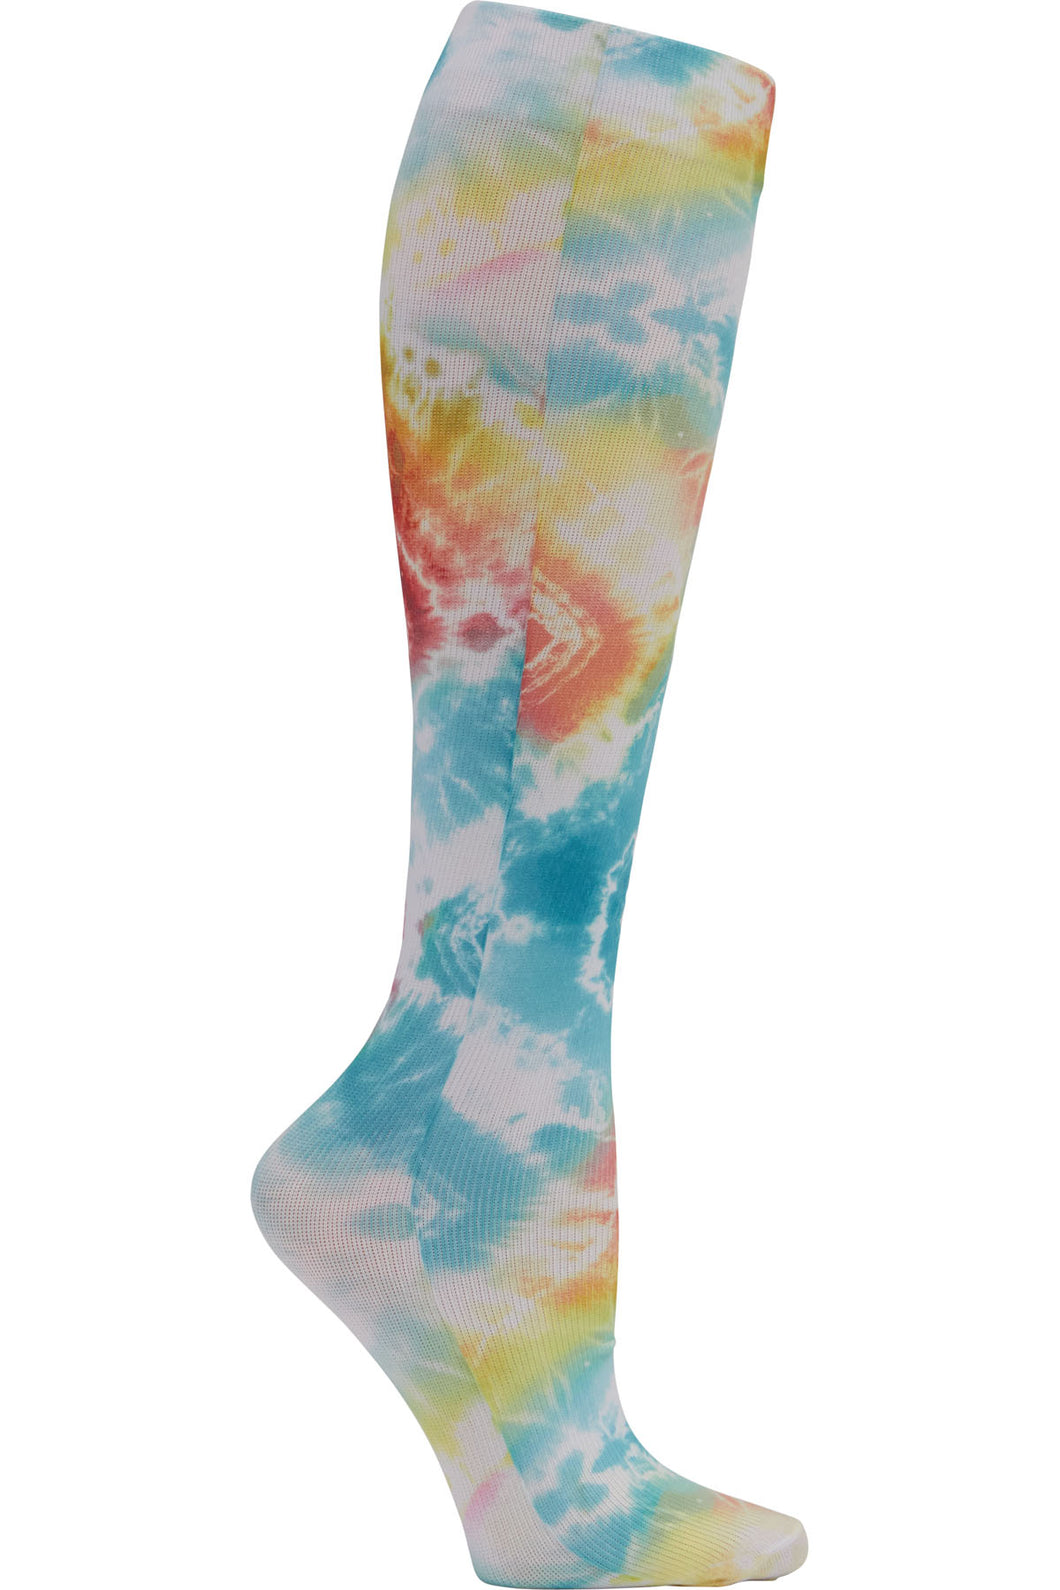 HEARTSOUL SOUL SUPPORT COMPRESSION SOCK BY CHEROKEE